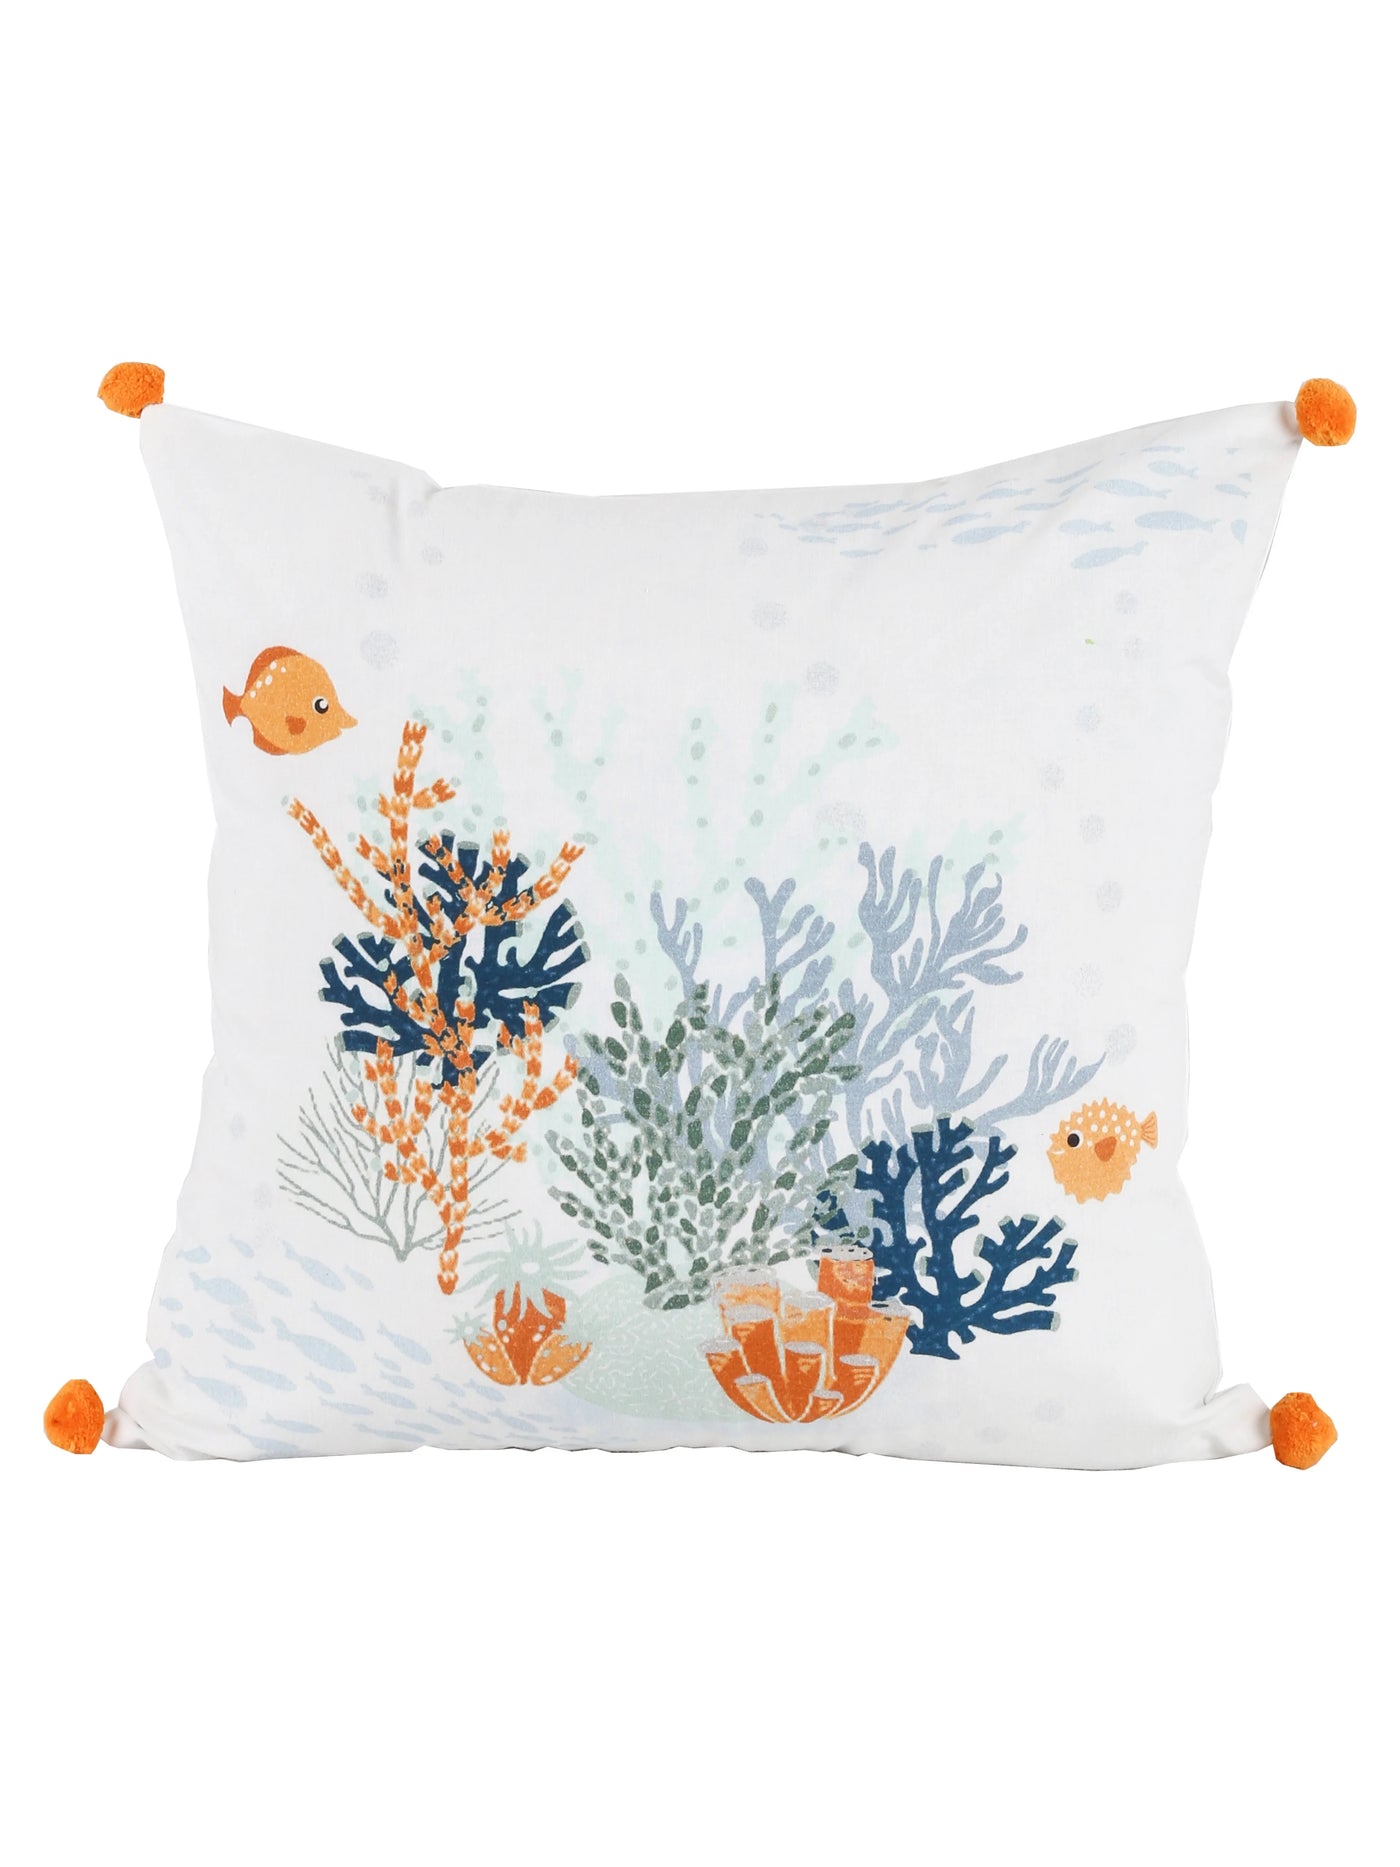 The Coral Reef Cushion Cover